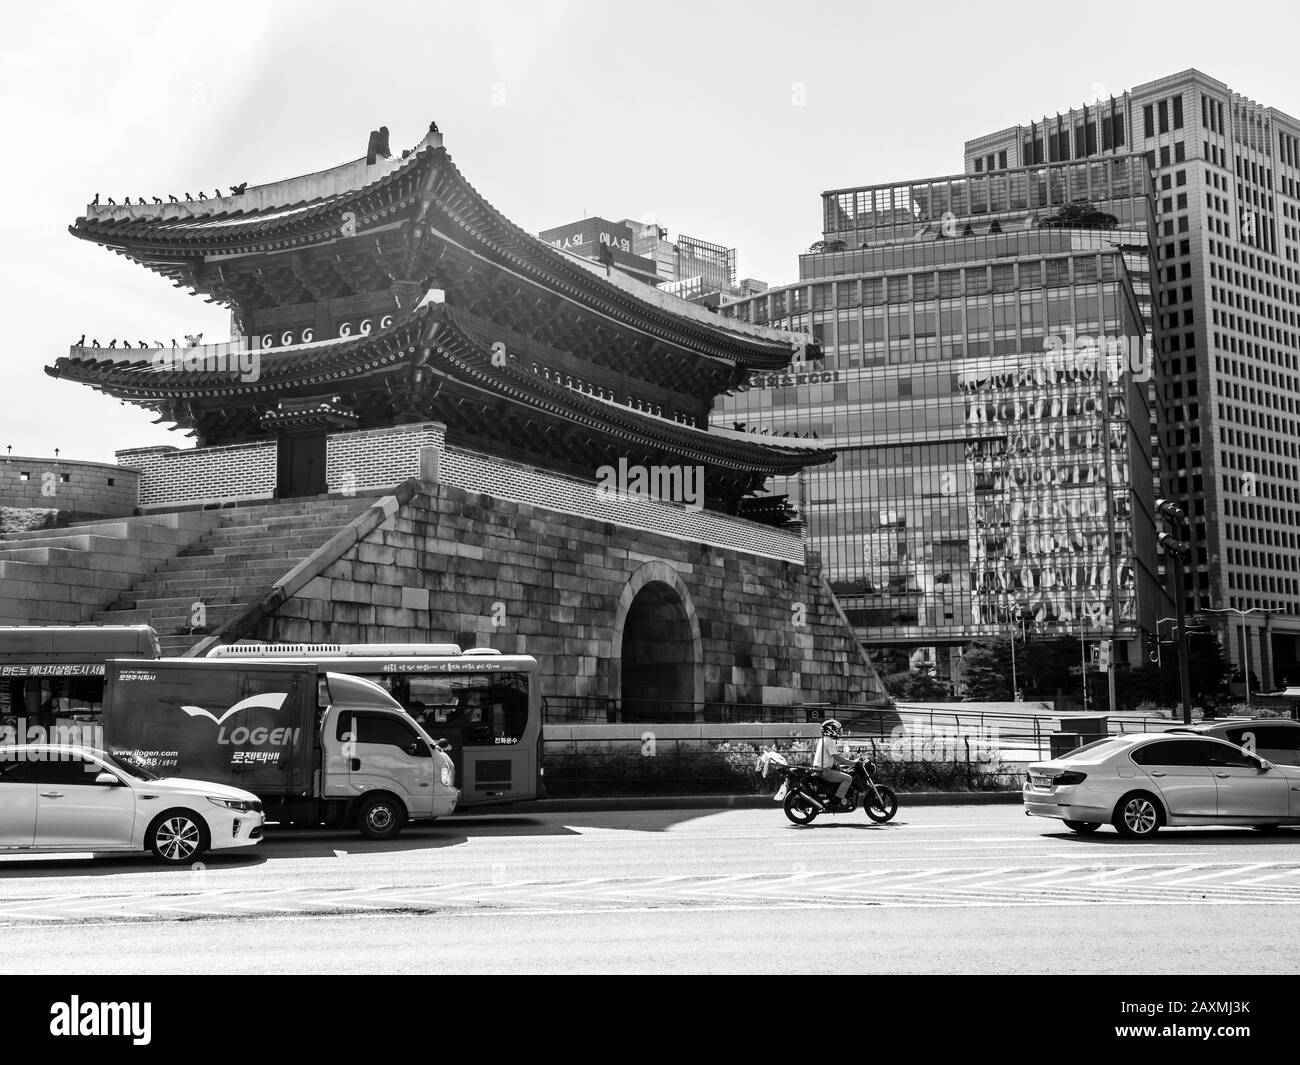 Seoul, South Korea - June 3, 2017: Man riding a motorbike among cars on the downtown in Seoul. Stock Photo